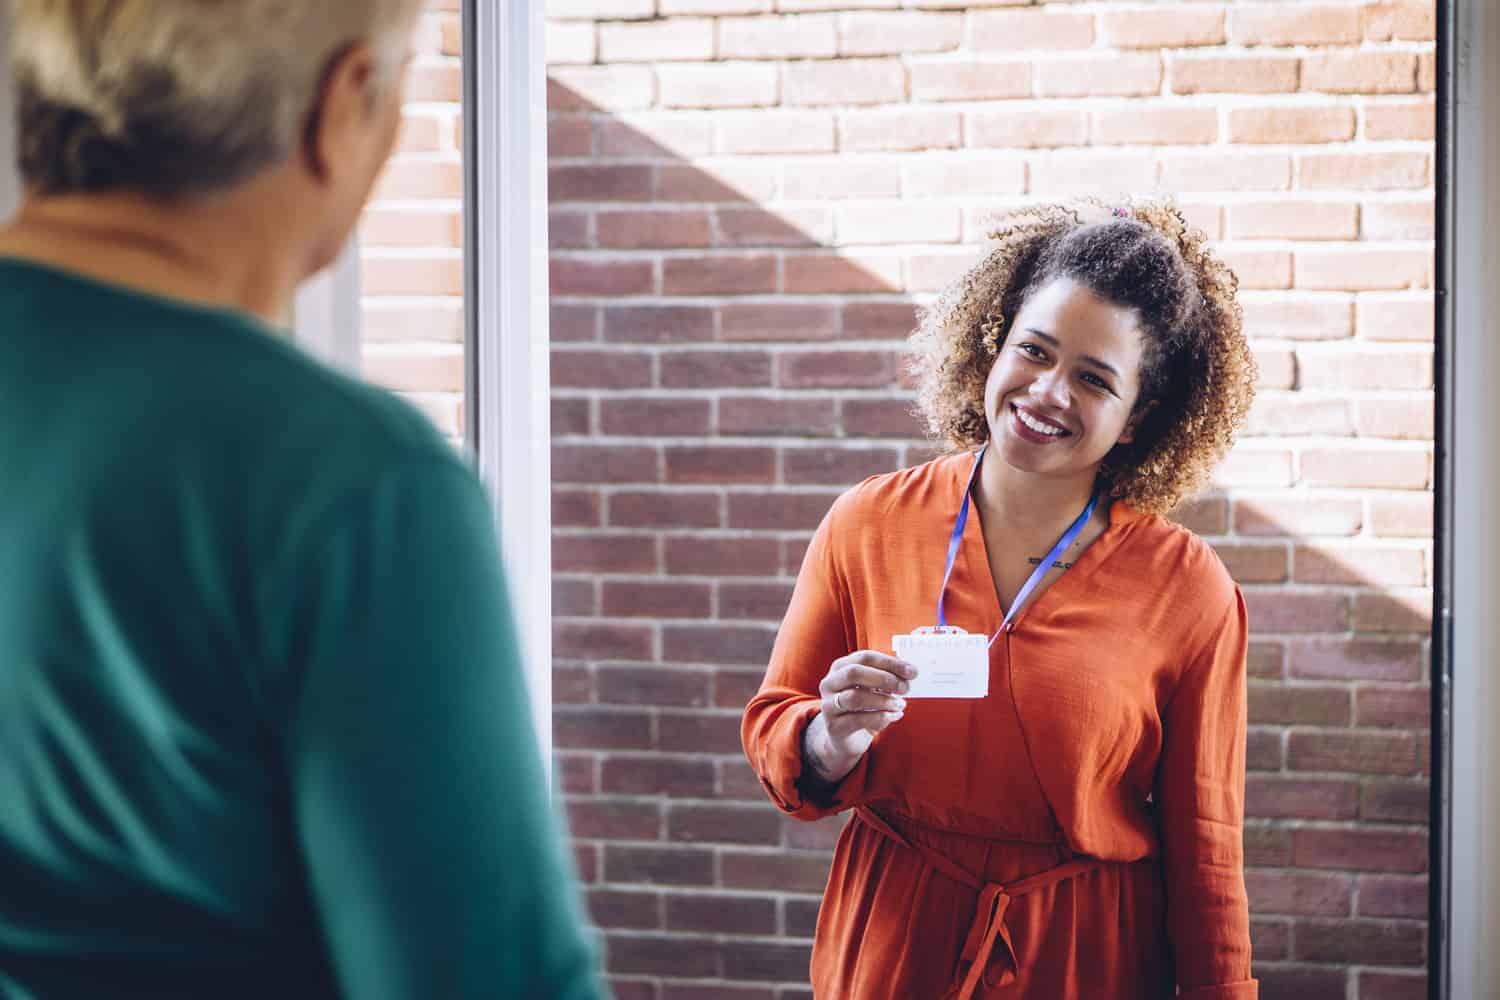 A smiling professional woman with an ID badge welcomes someone at the door for home care services.